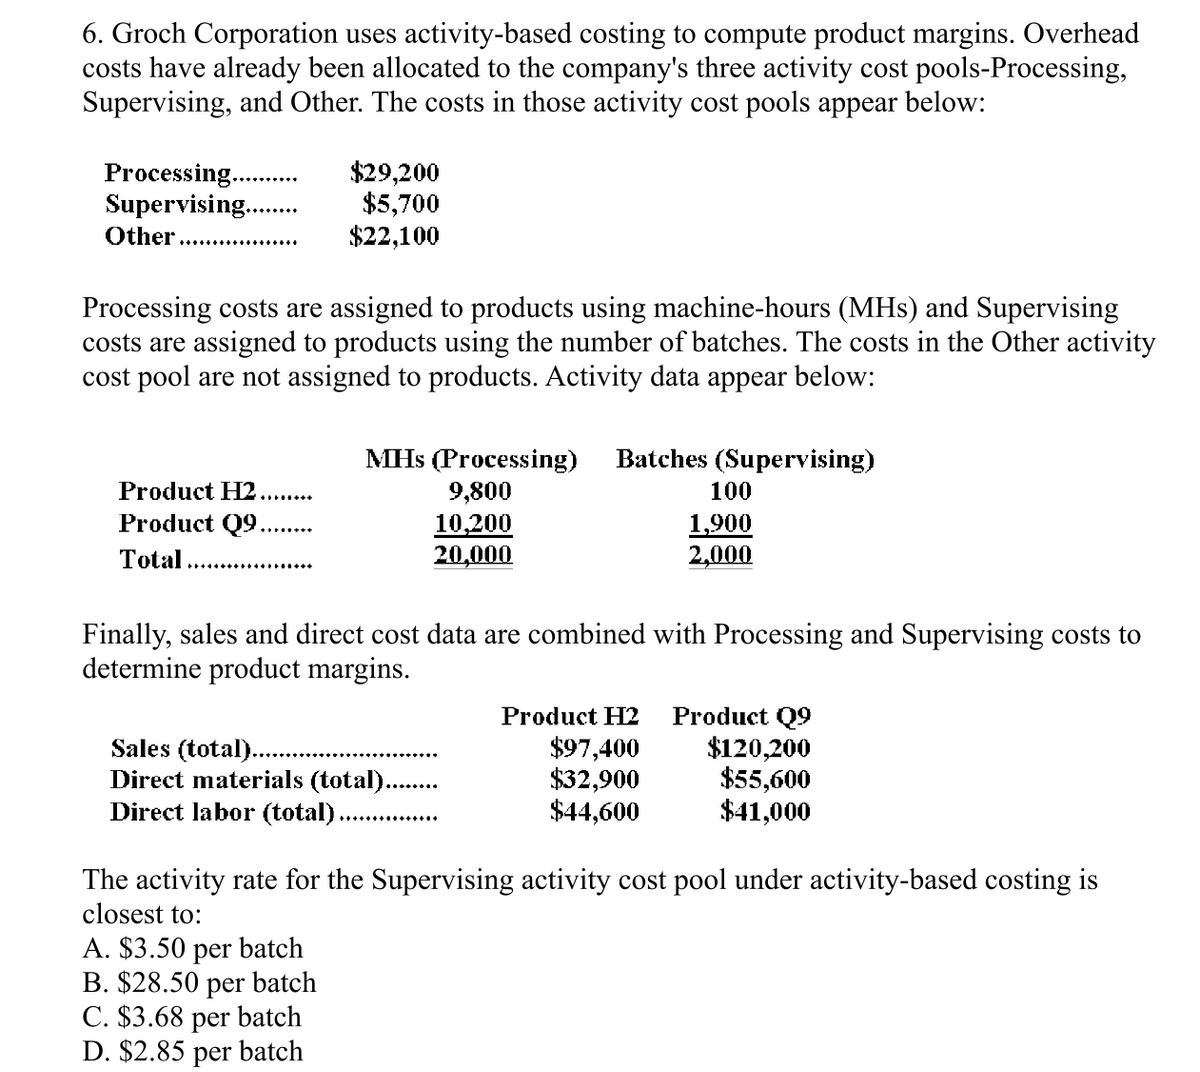 6. Groch Corporation uses activity-based costing to compute product margins. Overhead
costs have already been allocated to the company's three activity cost pools-Processing,
Supervising, and Other. The costs in those activity cost pools appear below:
Processing.
Supervising....
Other
$29,200
$5,700
$22,100
Processing costs are assigned to products using machine-hours (MHs) and Supervising
costs are assigned to products using the number of batches. The costs in the Other activity
cost pool are not assigned to products. Activity data appear below:
MHs (Processing)
Batches (Supervising)
Product H2
Product Q9...
9,800
100
10,200
1,900
Total
20,000
2,000
Finally, sales and direct cost data are combined with Processing and Supervising costs to
determine product margins.
Product H2
Product Q9
Sales (total)..
$97,400
$120,200
Direct materials (total).
$32,900
$55,600
Direct labor (total)..
$44,600
$41,000
The activity rate for the Supervising activity cost pool under activity-based costing is
closest to:
A. $3.50 per batch
B. $28.50 per batch
C. $3.68 per batch
D. $2.85 per batch